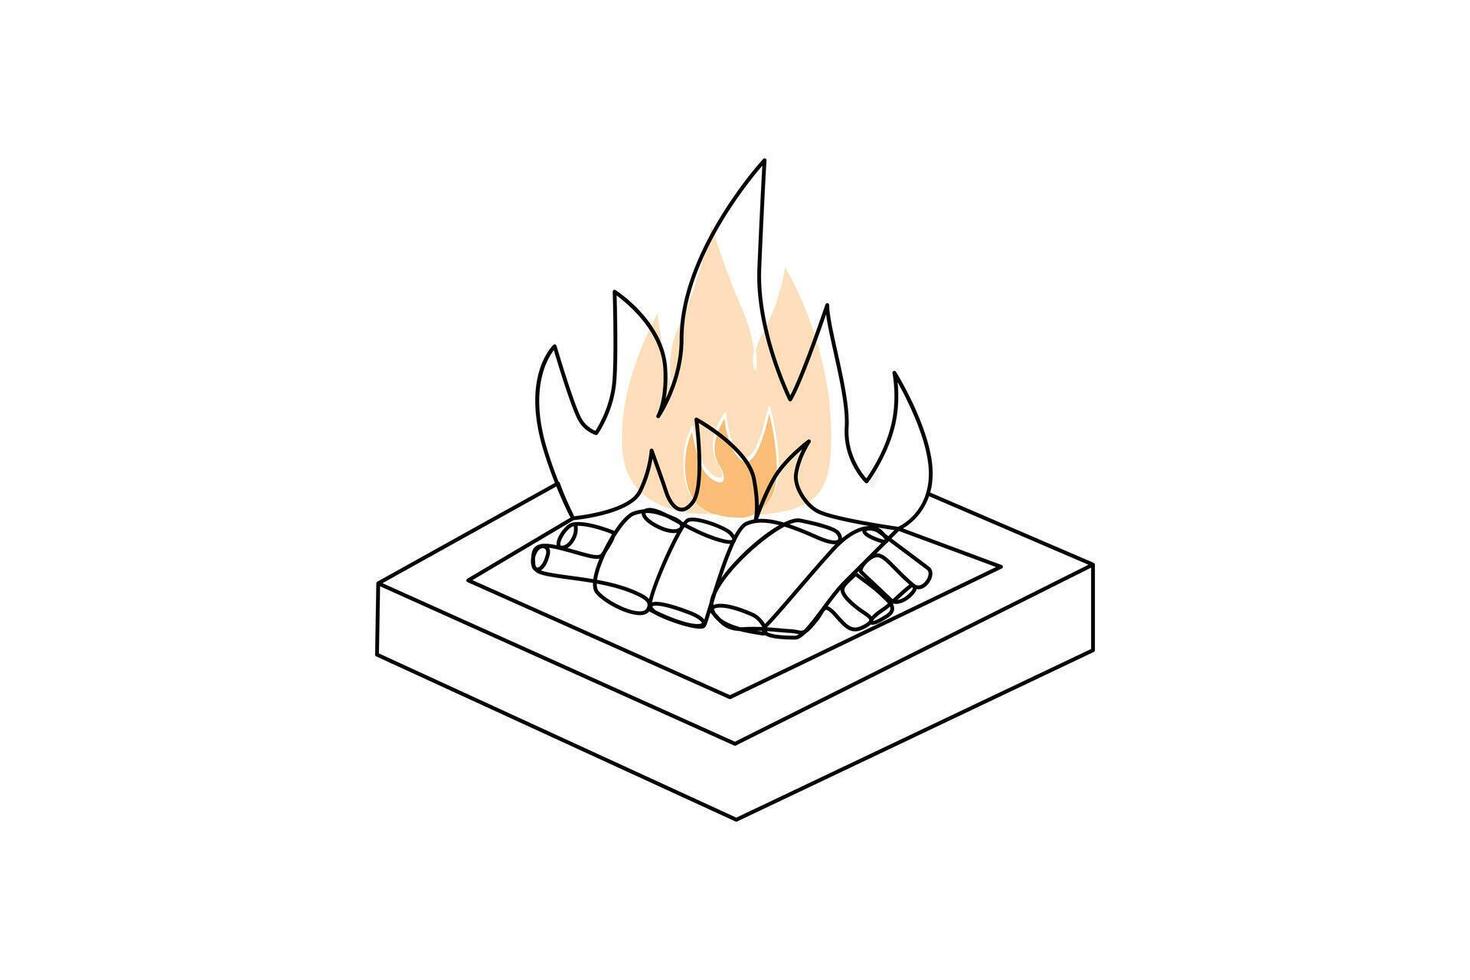 Continuous single-line bonfire drawing and outline fire concept art illustration vector